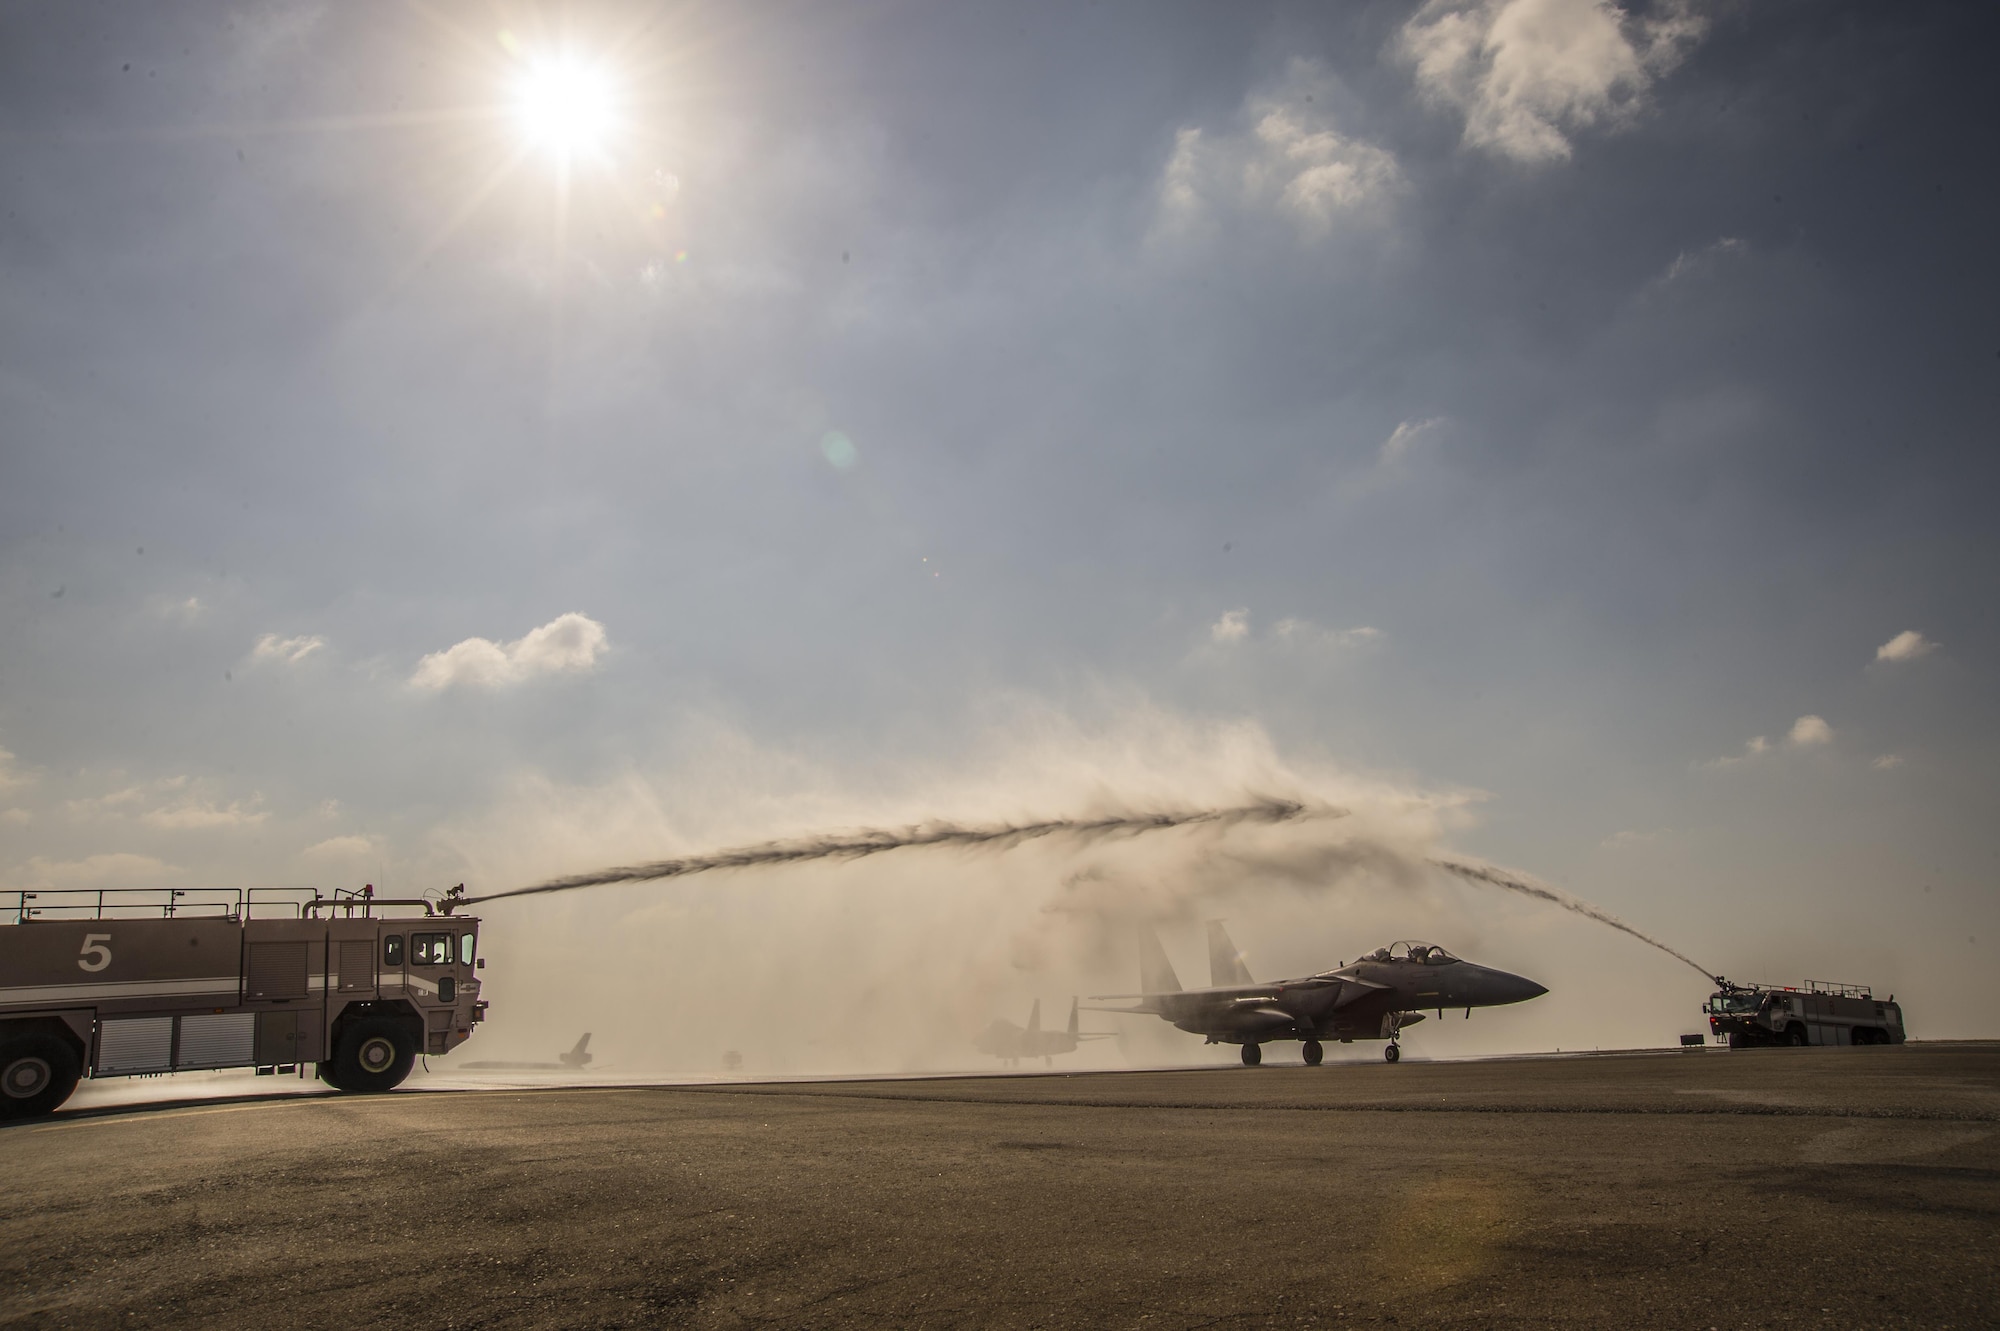 U.S. Air Force 380 Expeditionary Civil Engineer Squadron Fire Engines spray water over a taxing F-15E Strike Eagle at an undisclosed location in Southwest Asia, Feb. 13, 2016. The water arch was brought to the flight line to celebrate the achievement of the weapon systems officer on board who surpassed the 1,000 combat flight hour milestone during the mission. (U. S. Air Force photo by Tech. Sgt. Frank Miller/Released)